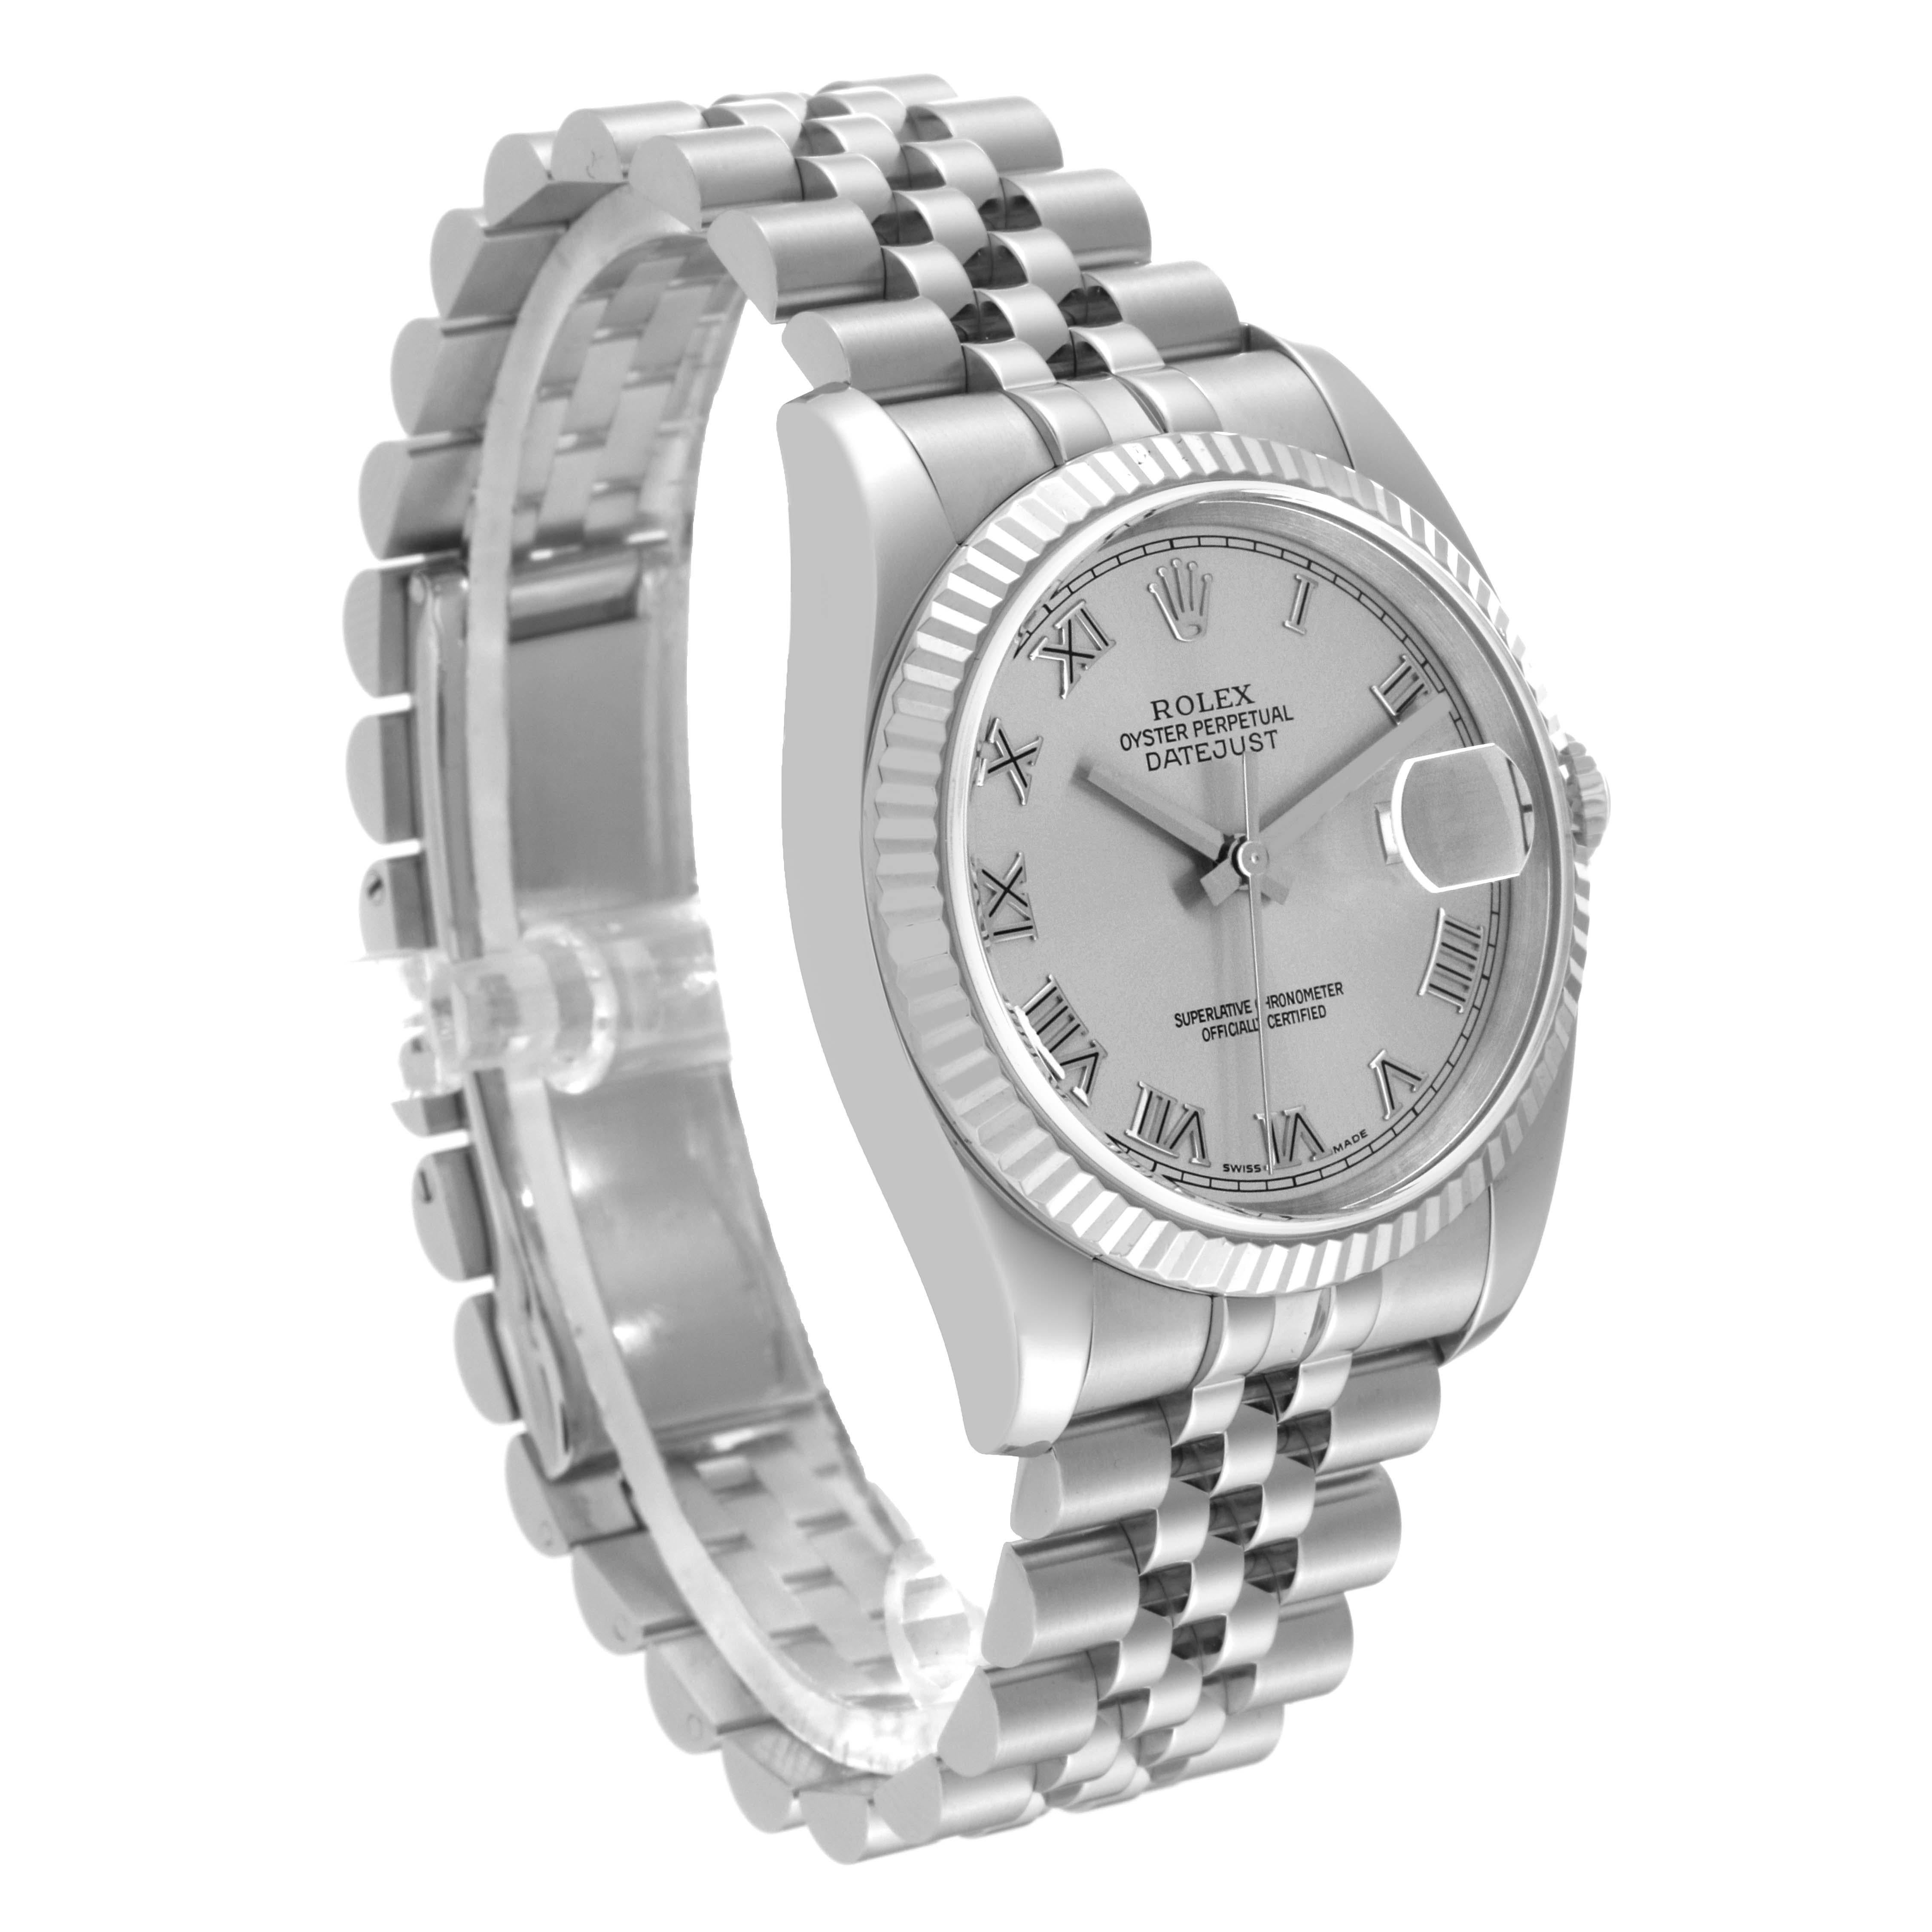 Rolex Datejust Steel White Gold Silver Roman Dial Mens Watch 116234 For Sale 2